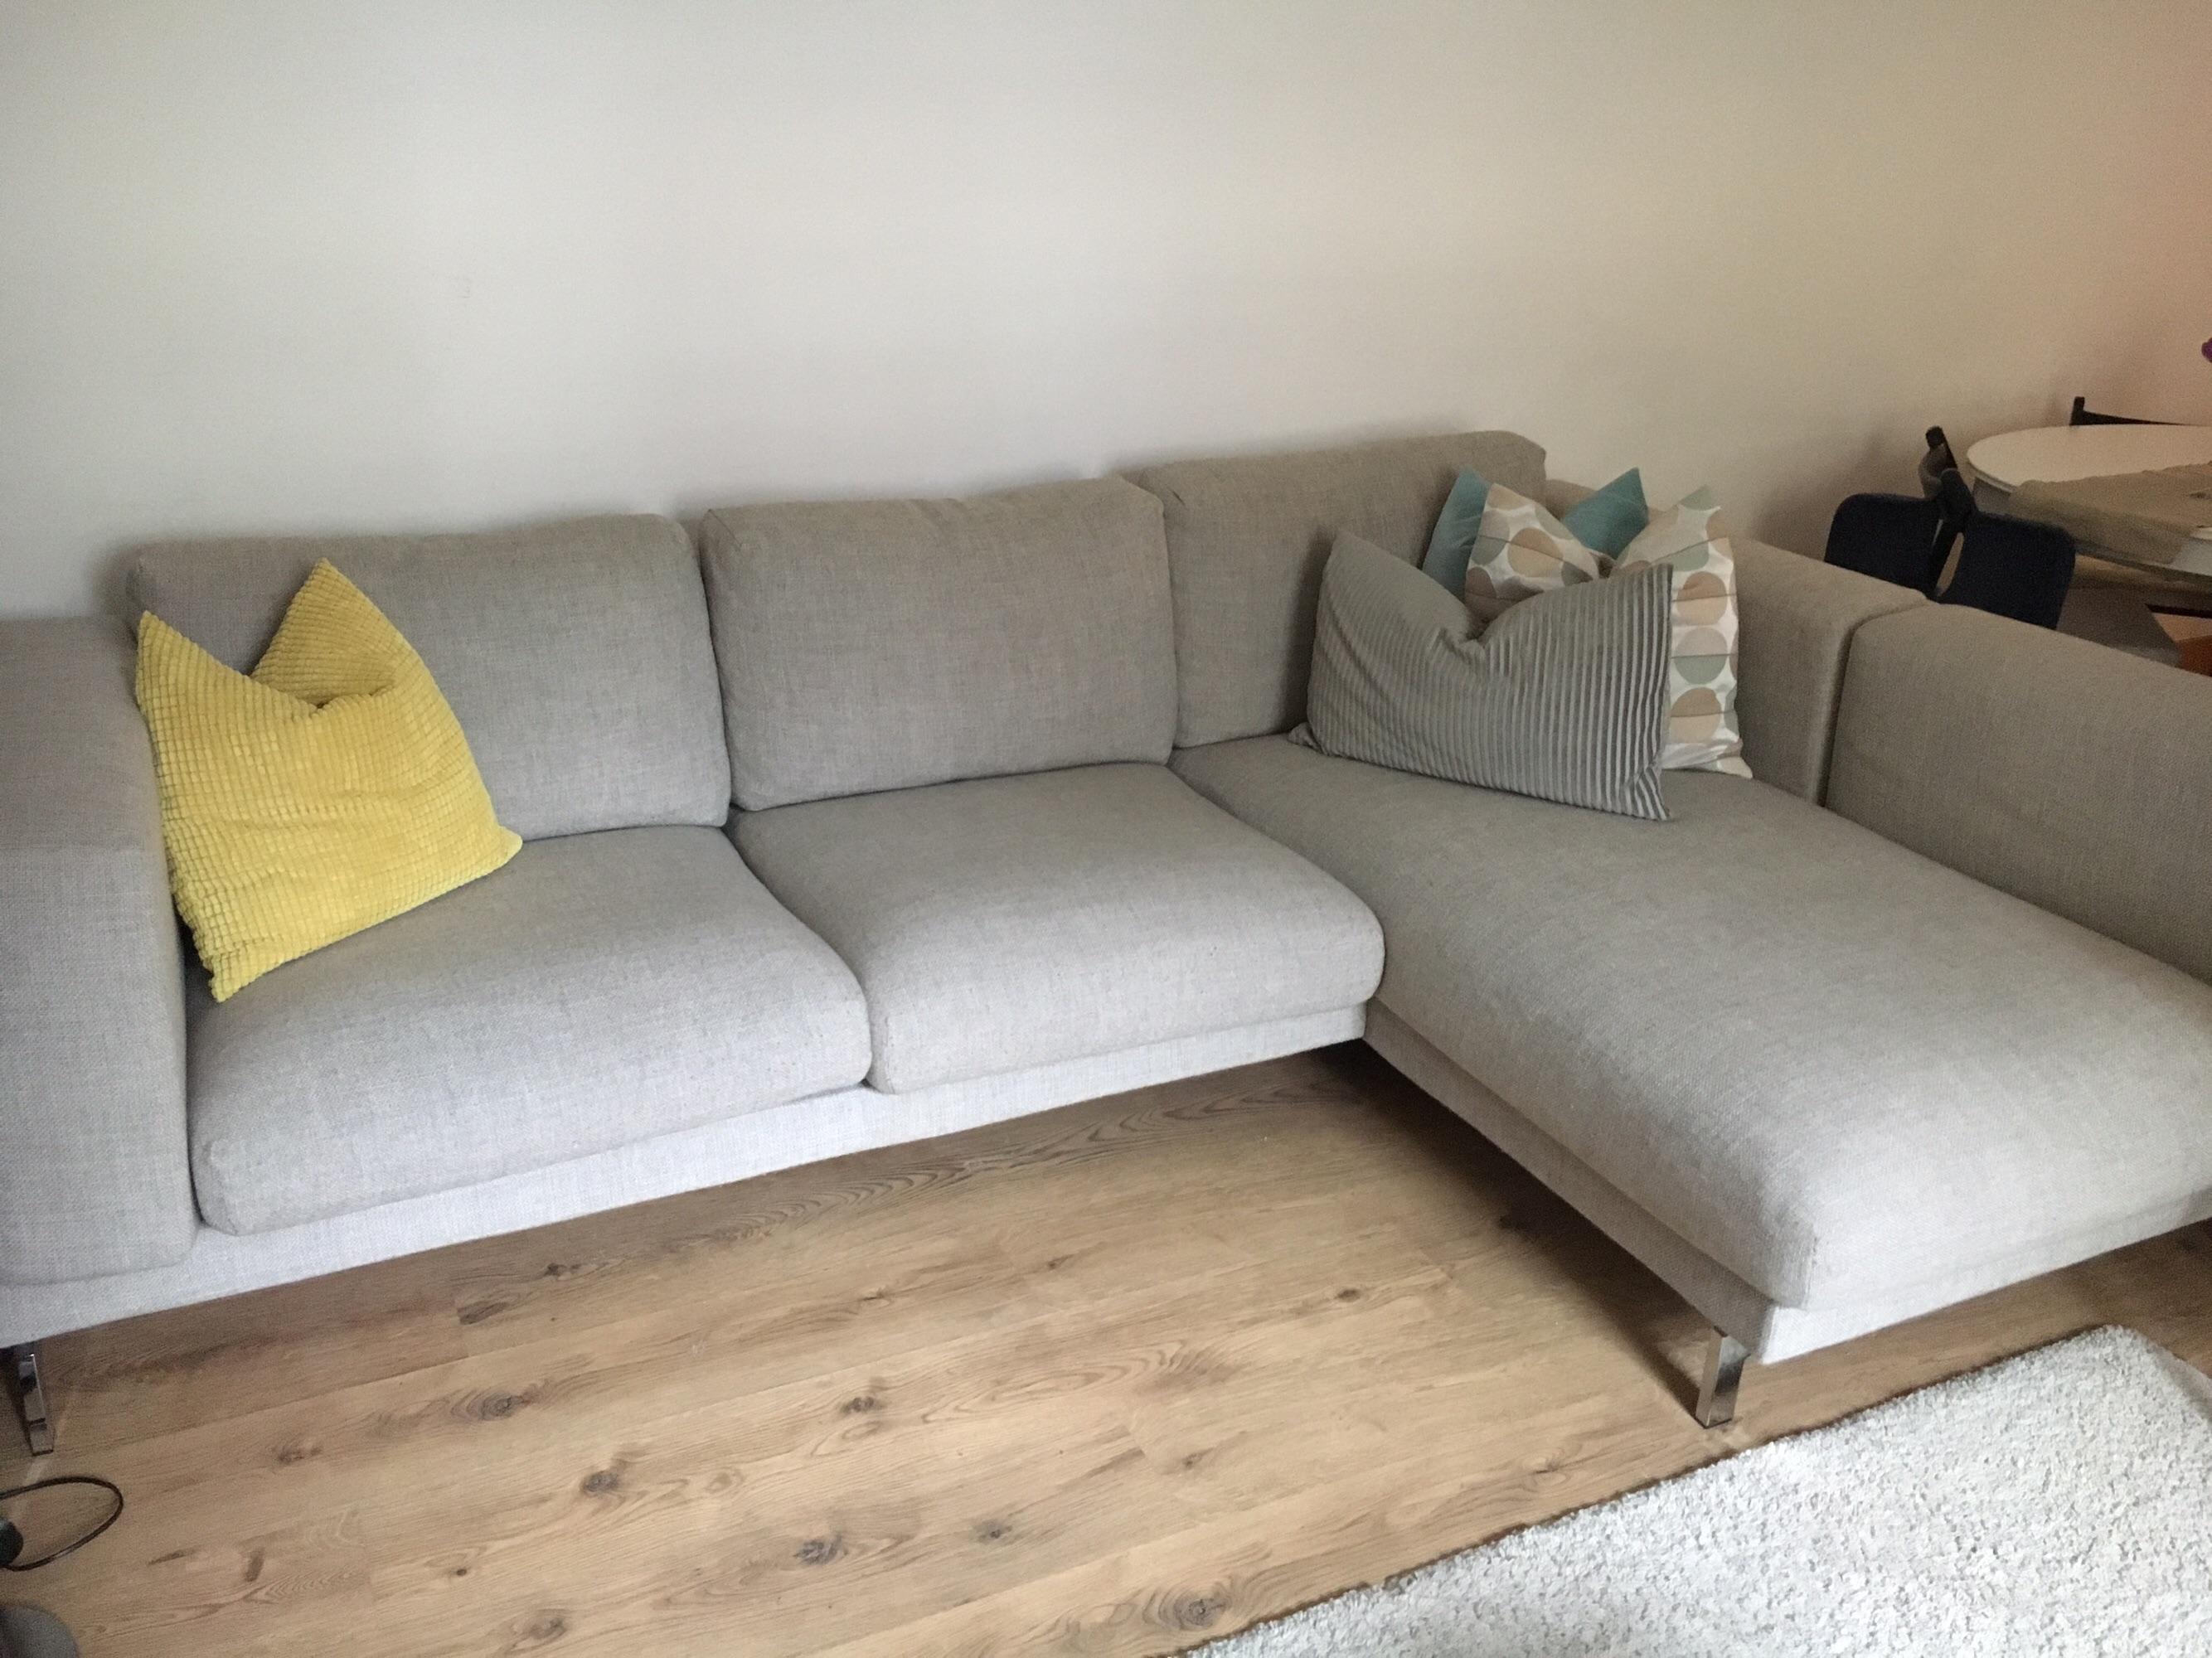 IKEA Nockeby corner sofa in WC1H London for £495.00 for